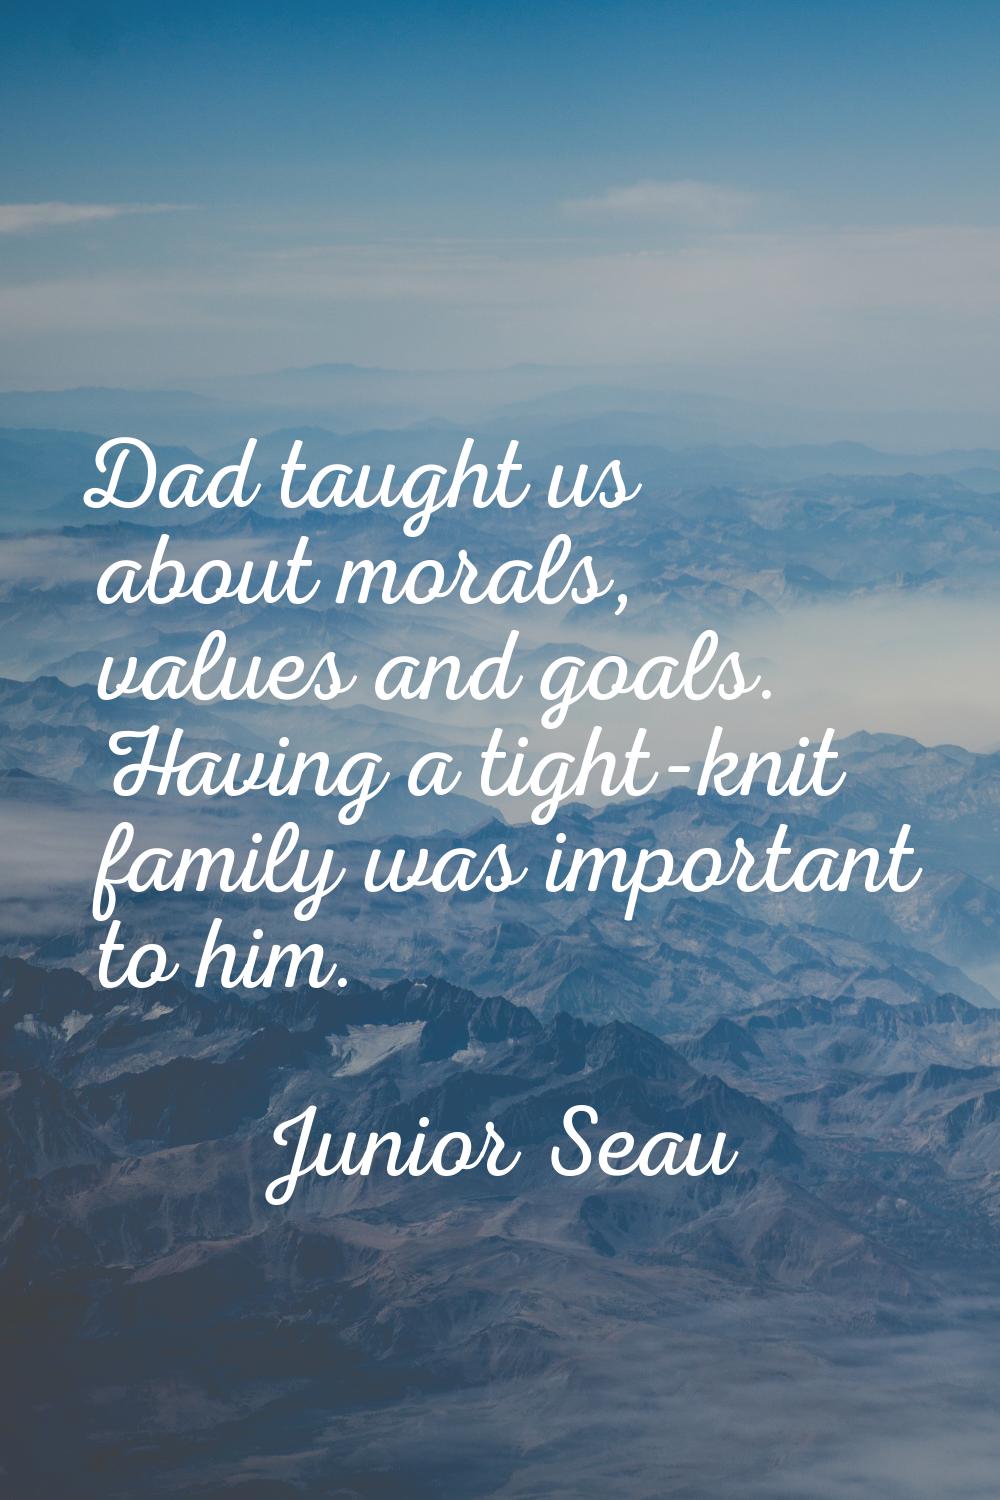 Dad taught us about morals, values and goals. Having a tight-knit family was important to him.